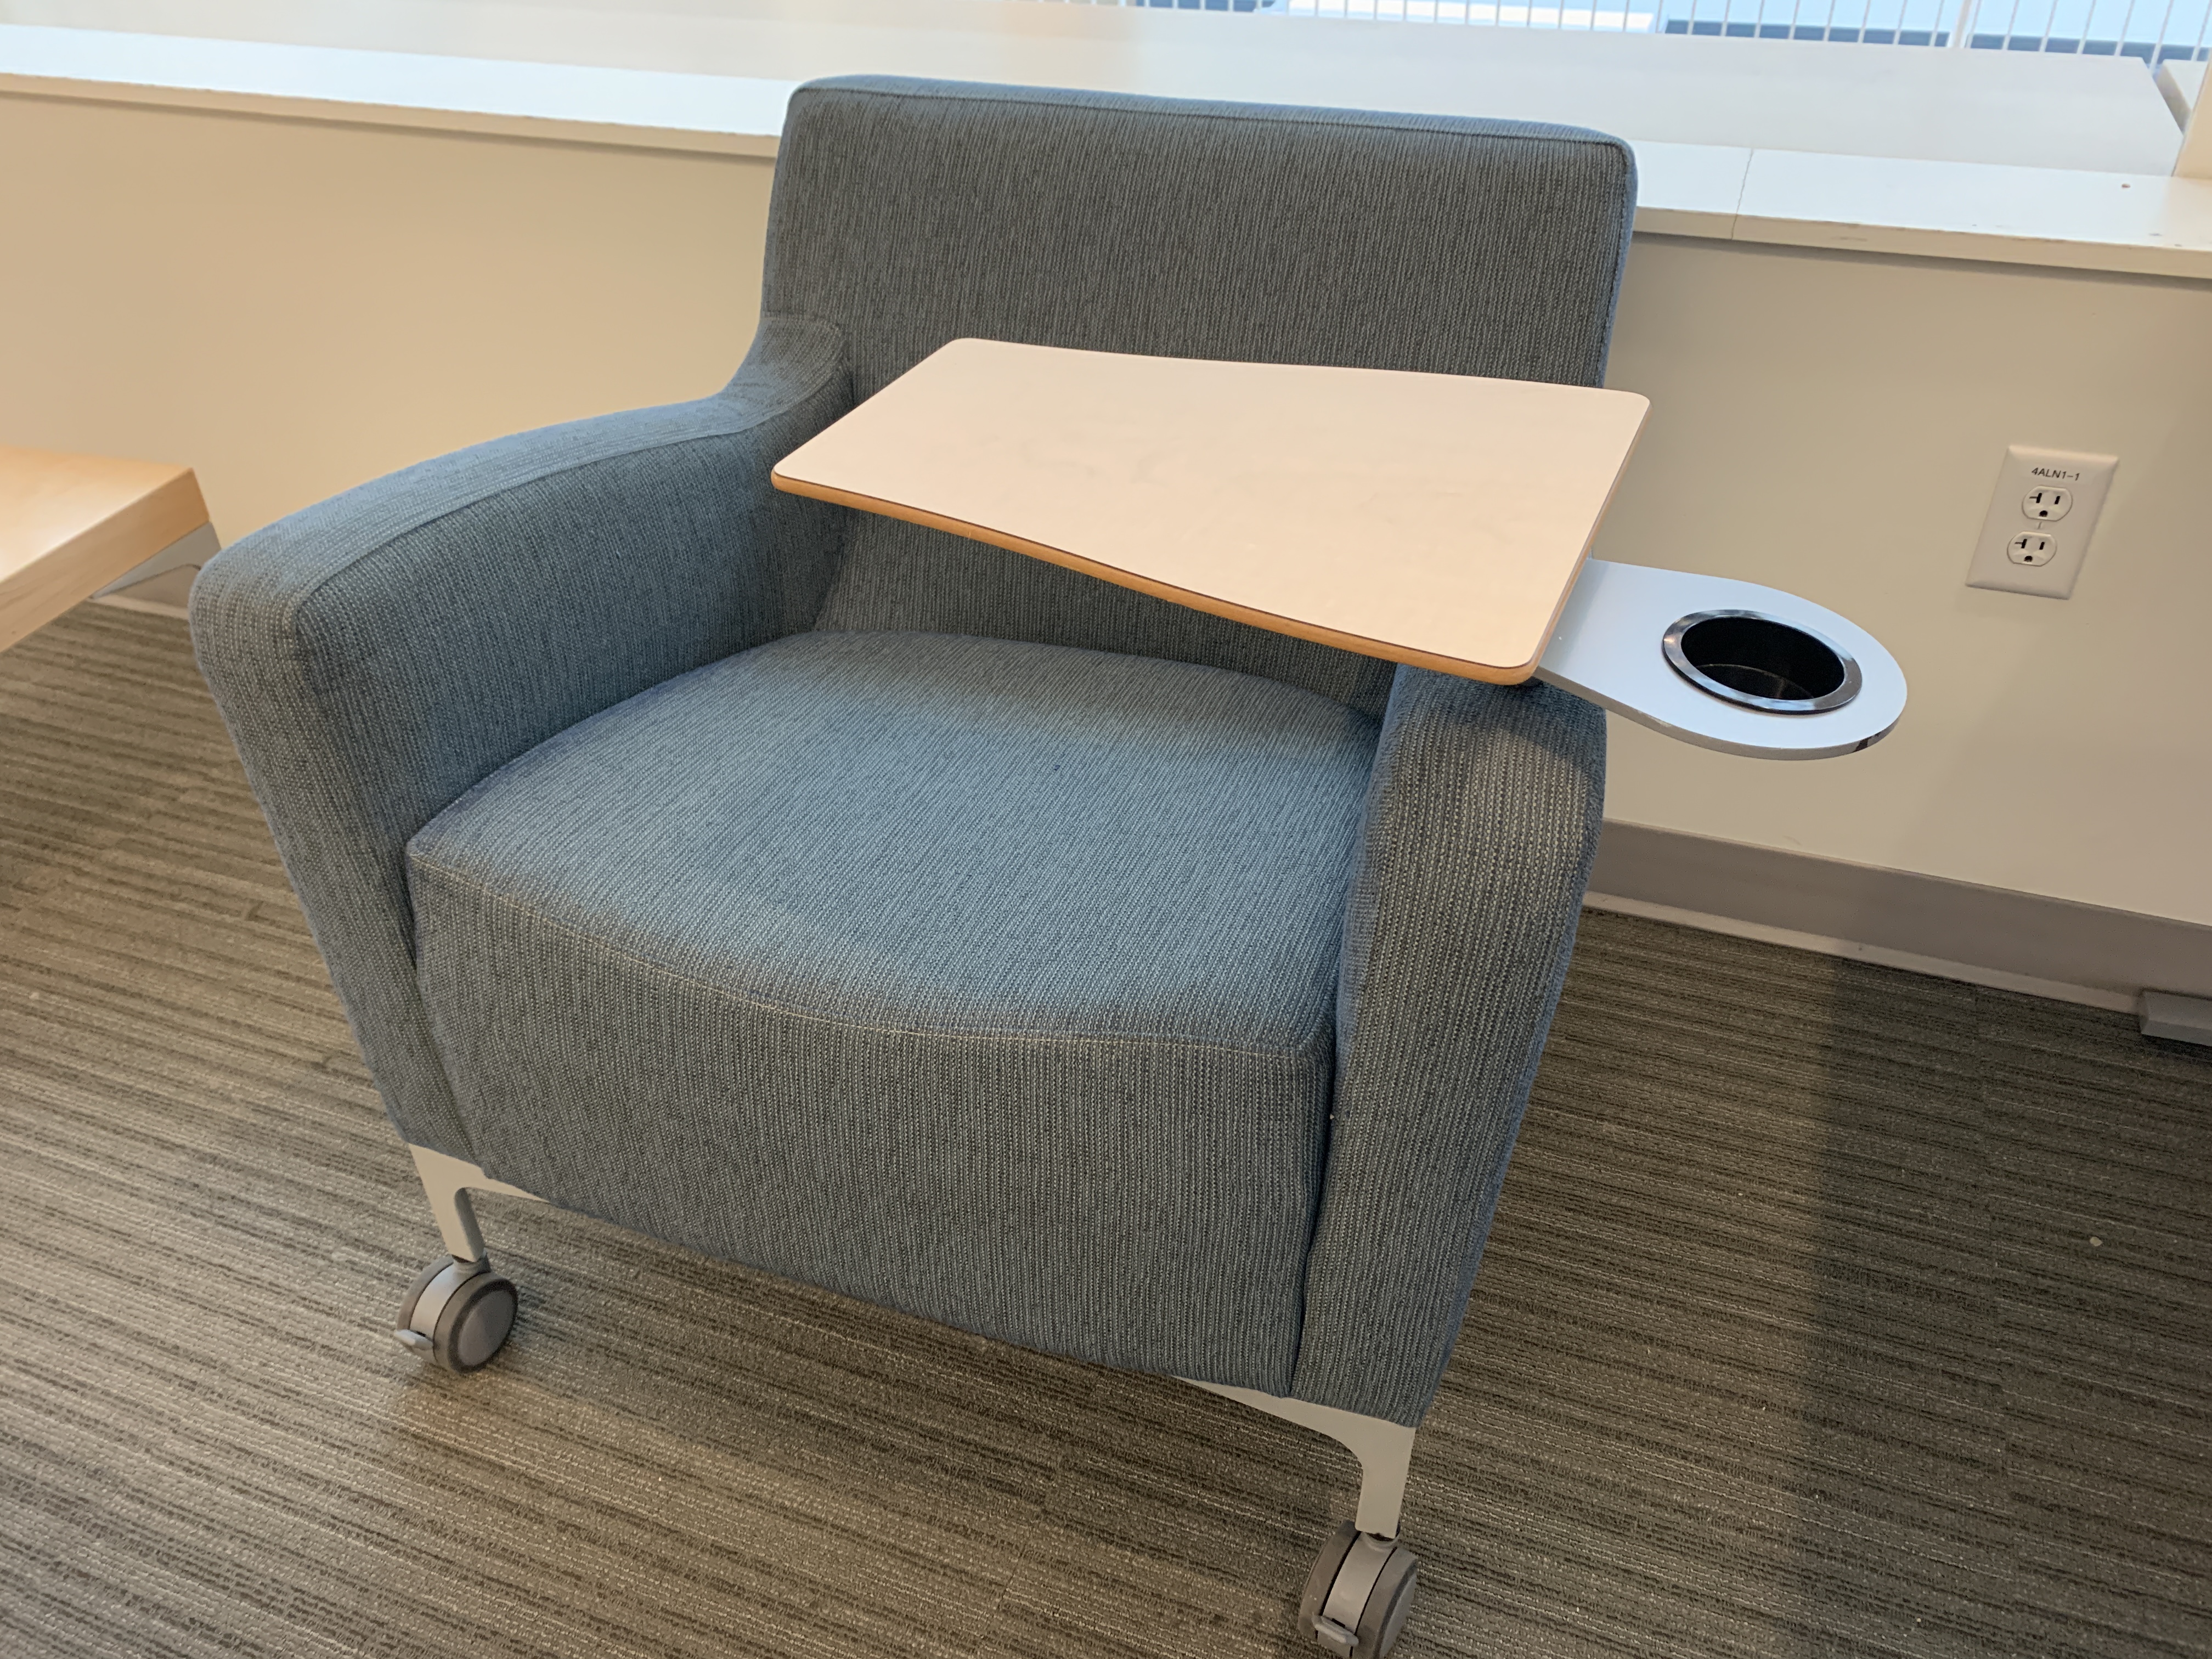 A padded chair with a swivel lap desk and a cup holder sits in a library space.